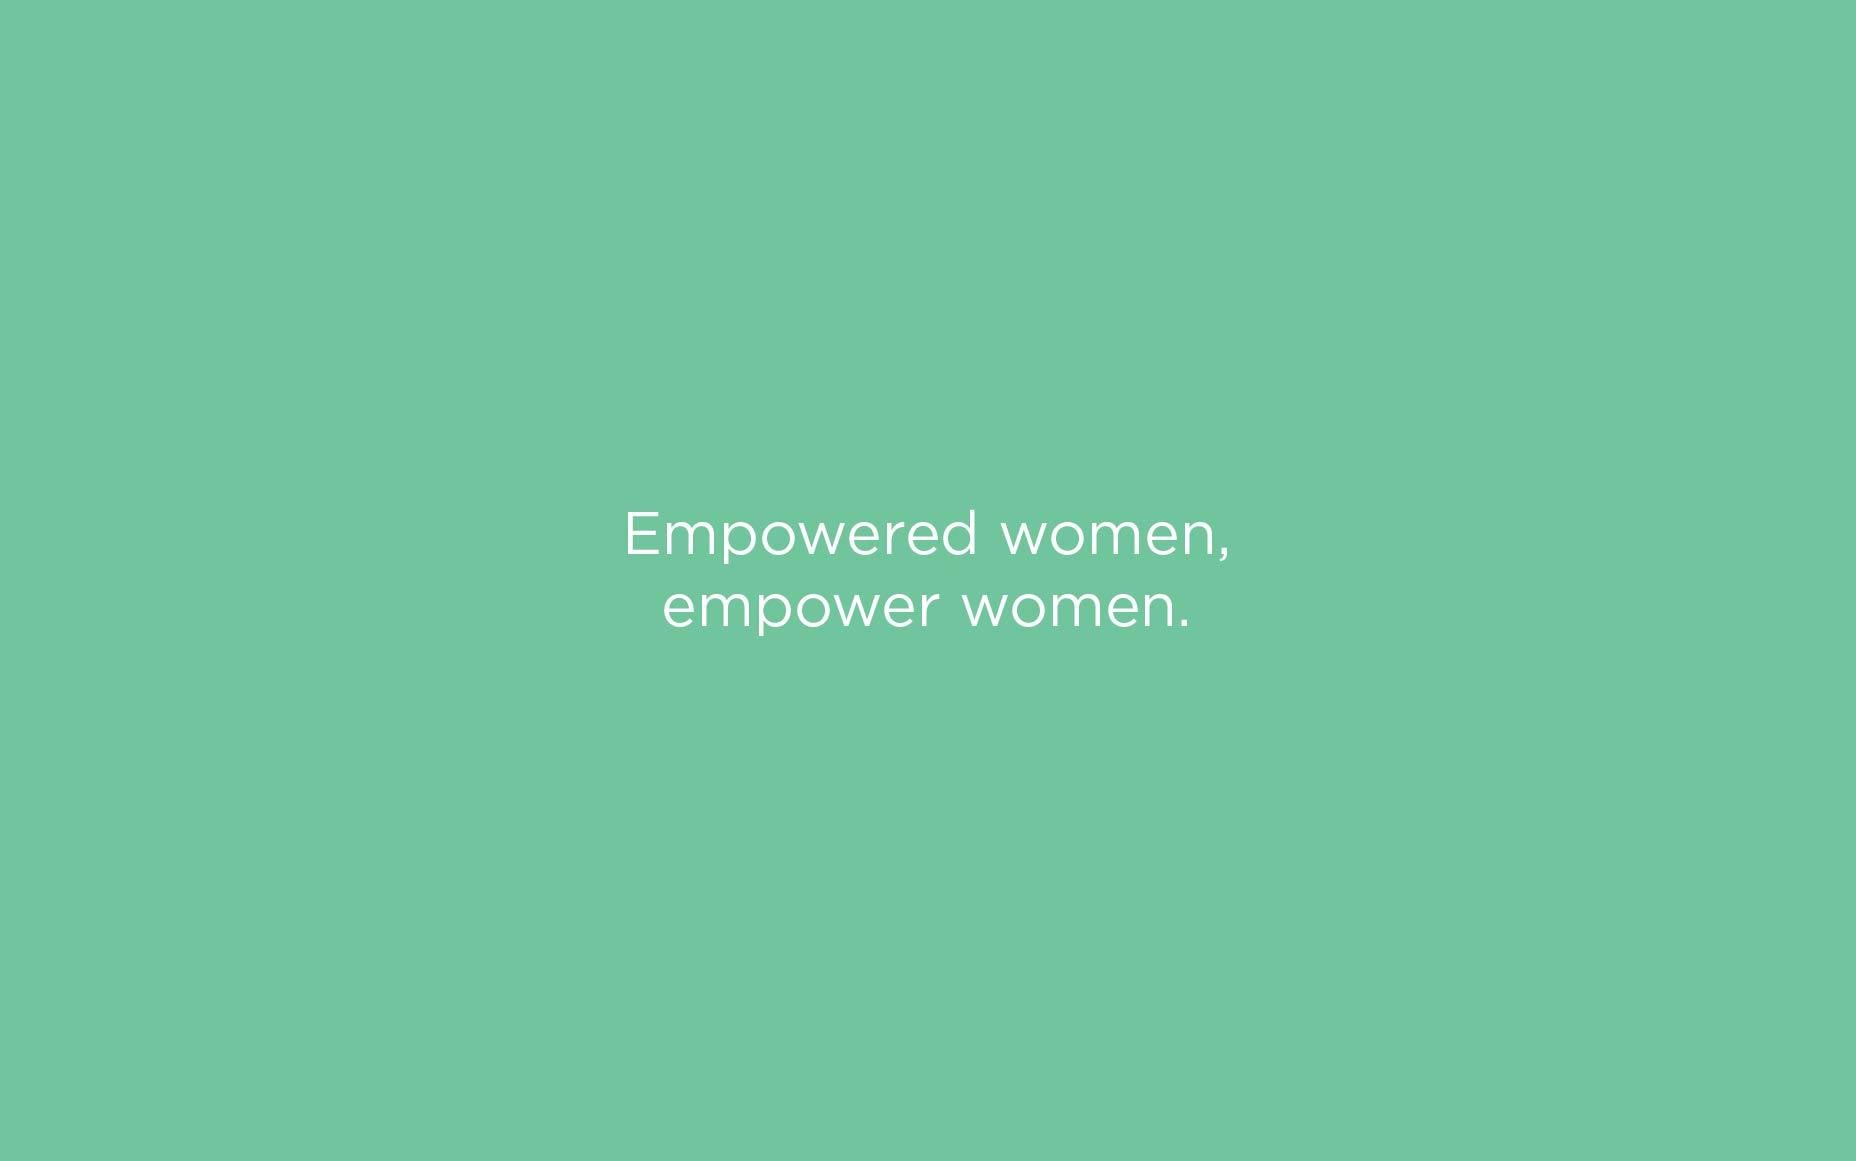 Ladies be confident and show them the strong independent woman in you  Celebrate InternationalWomensDay with these women empowerment wallpapers  Grab them now  Marnita Swickard  Michelle Blizzard  eMerge Real  Estate 